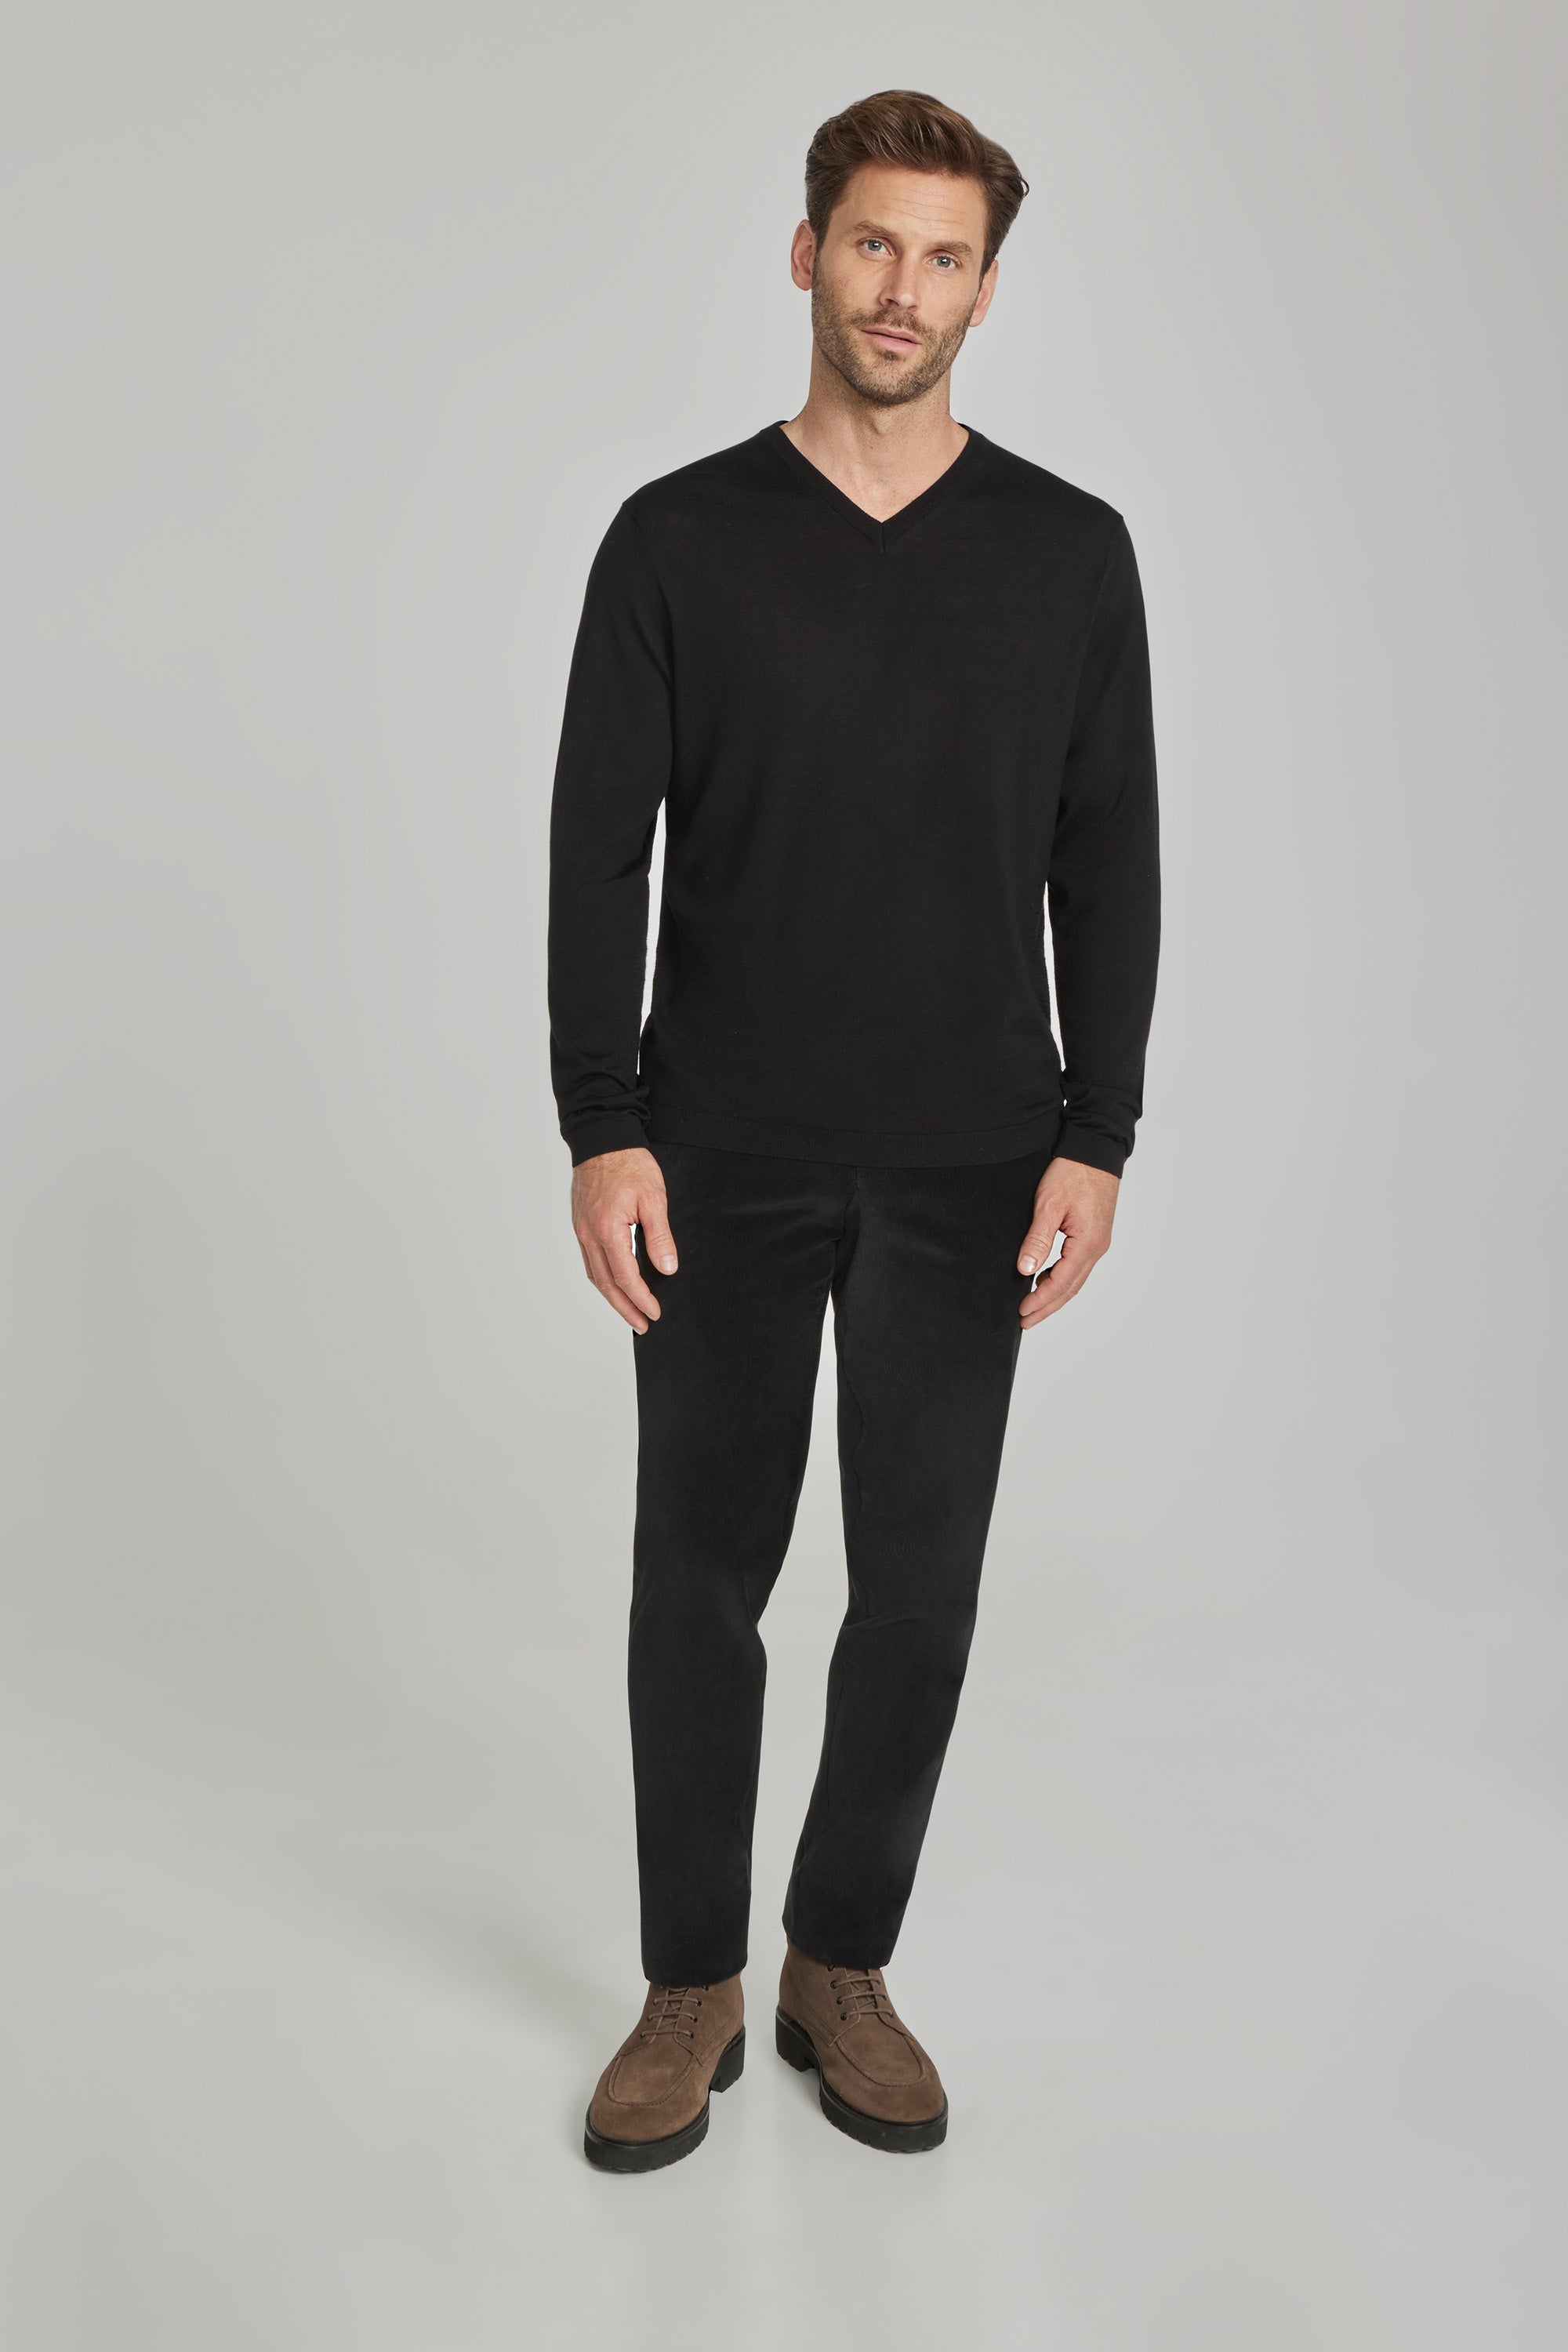 Image of Ramezay Black Wool, Silk and Cashmere V-Neck Sweater-Jack Victor